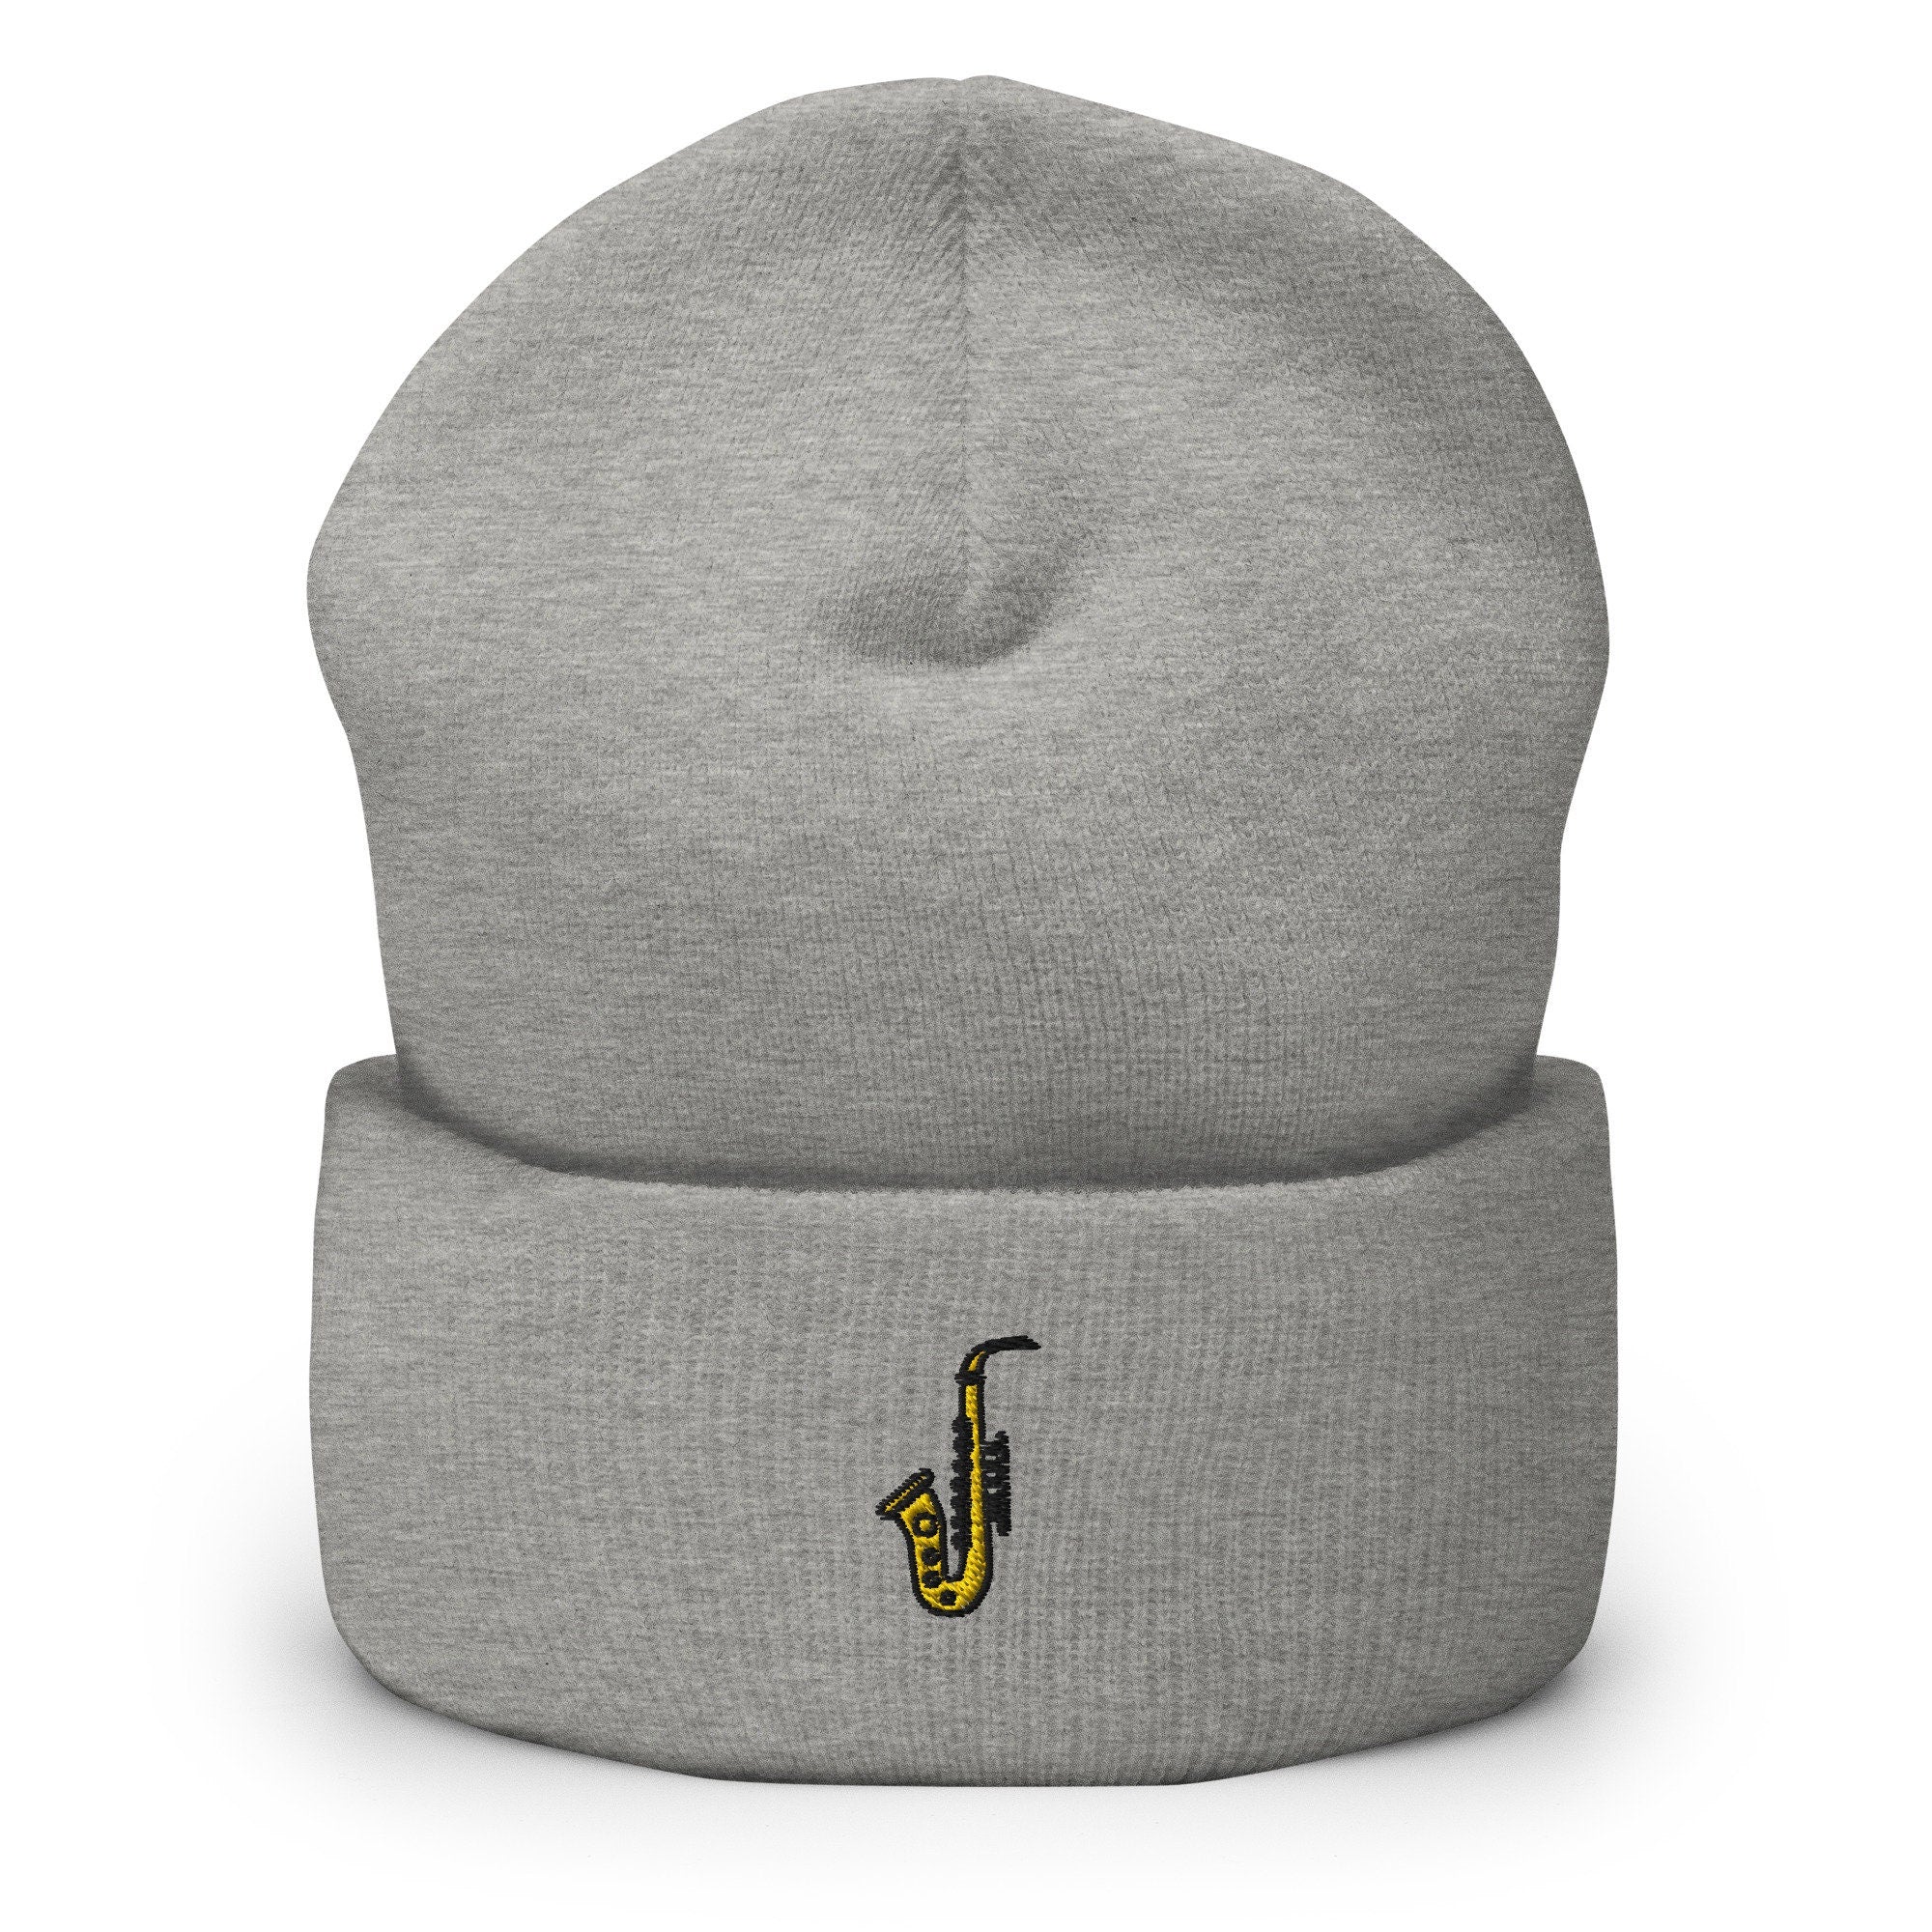 Saxophone Embroidered Beanie, Handmade Cuffed Knit Unisex Slouchy Adult Winter Hat Cap Gift